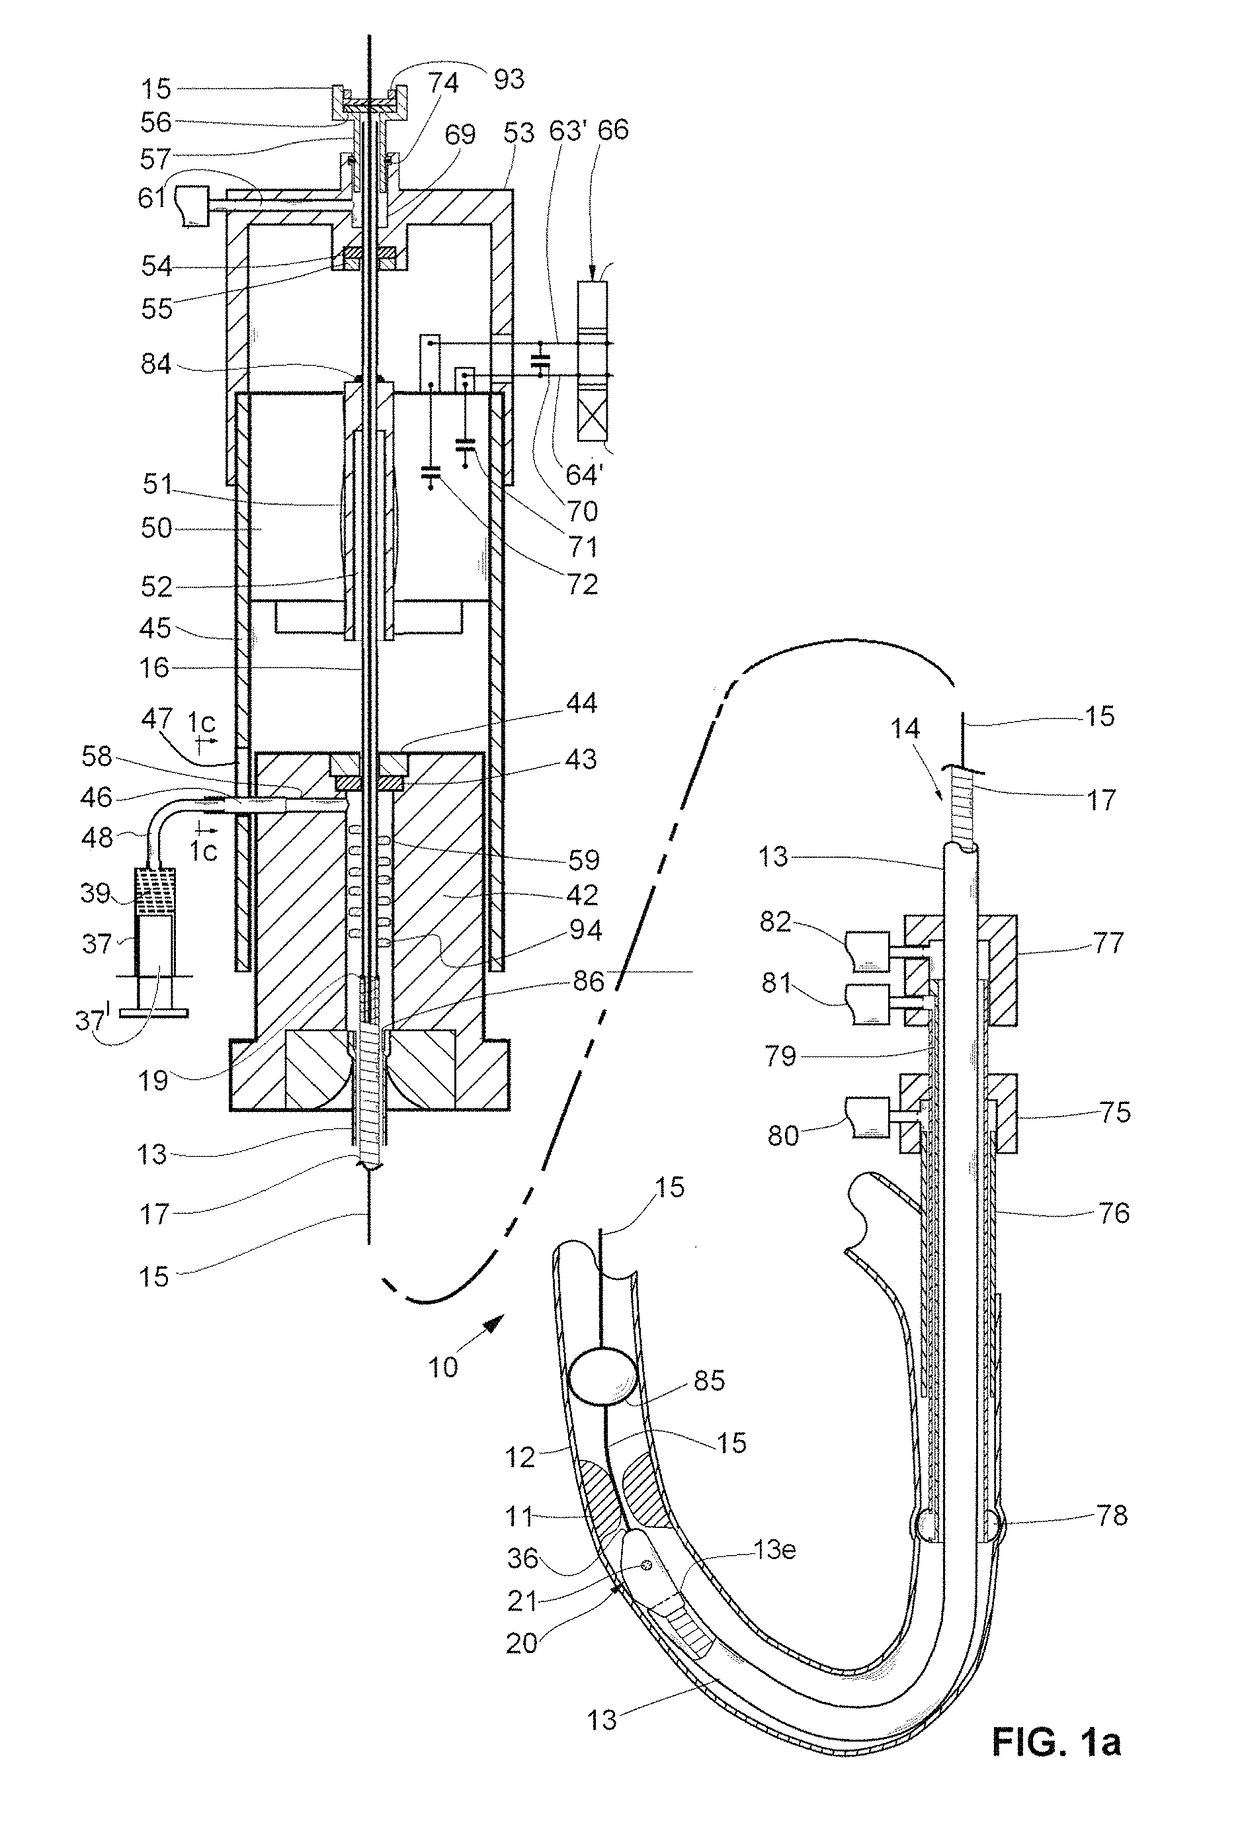 Mechanical — pharmaceutical system for opening obstructed bodily vessels